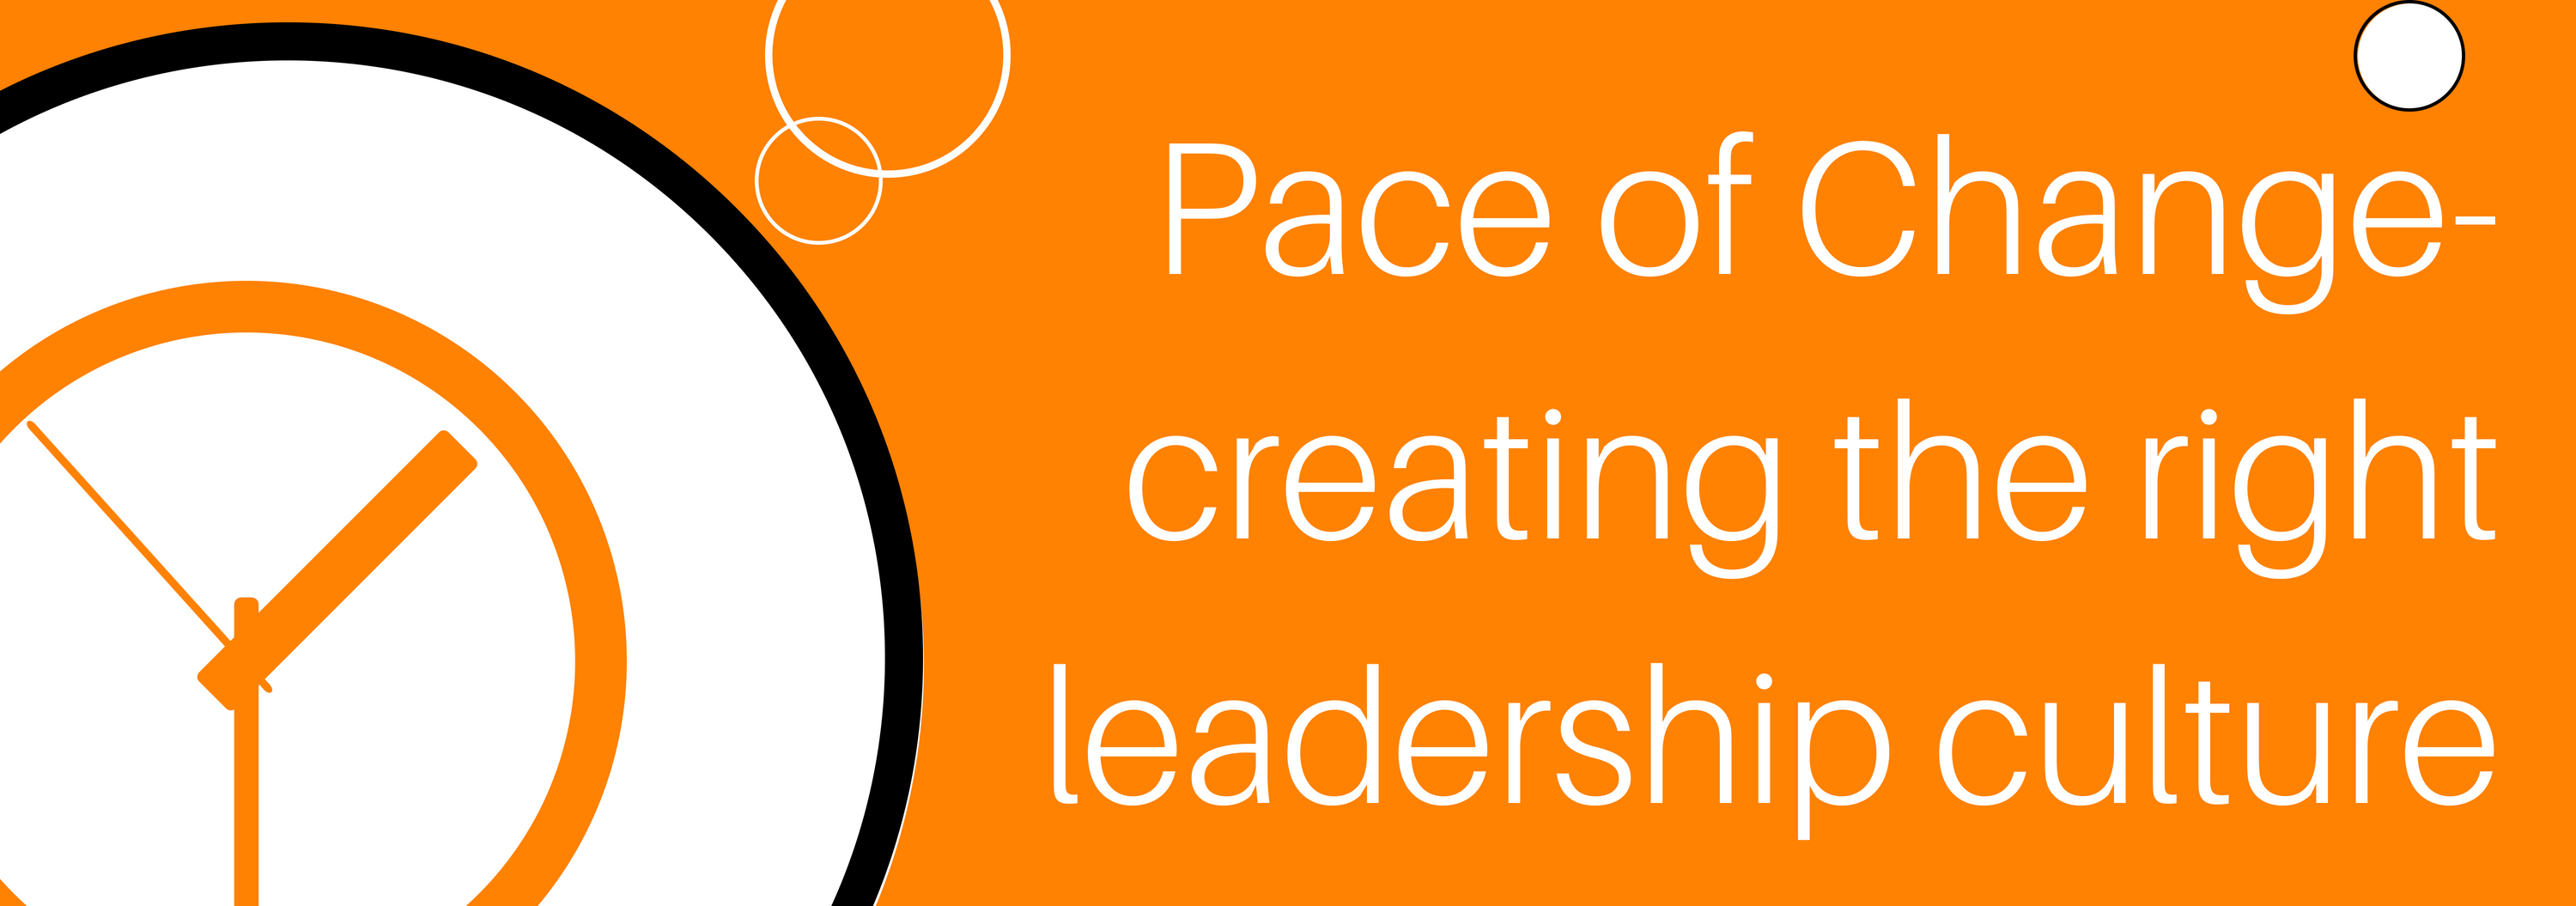 Pace of Change- creating the right leadership culture